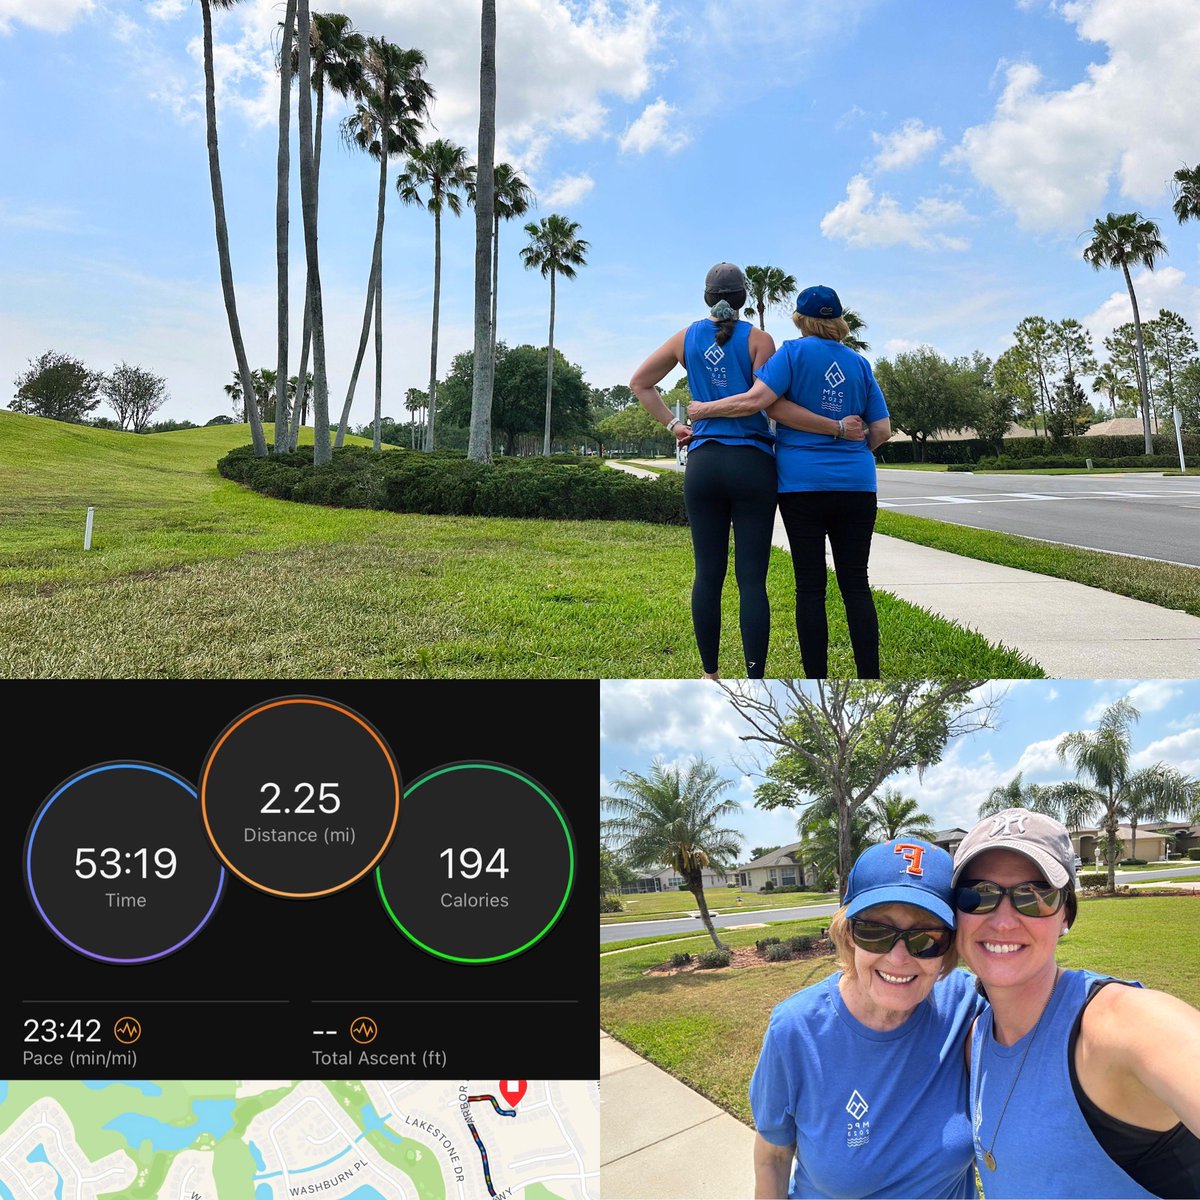 Ecstatic to get the opportunity to meet up and spend the weekend with this lady! I have to brag on her for getting out and walking 2.25 miles 🤍#43roadtripmilesforcoachsam #PeakerMeetUp #MyPeakChallenge #mpc2023 #StrongerTogether